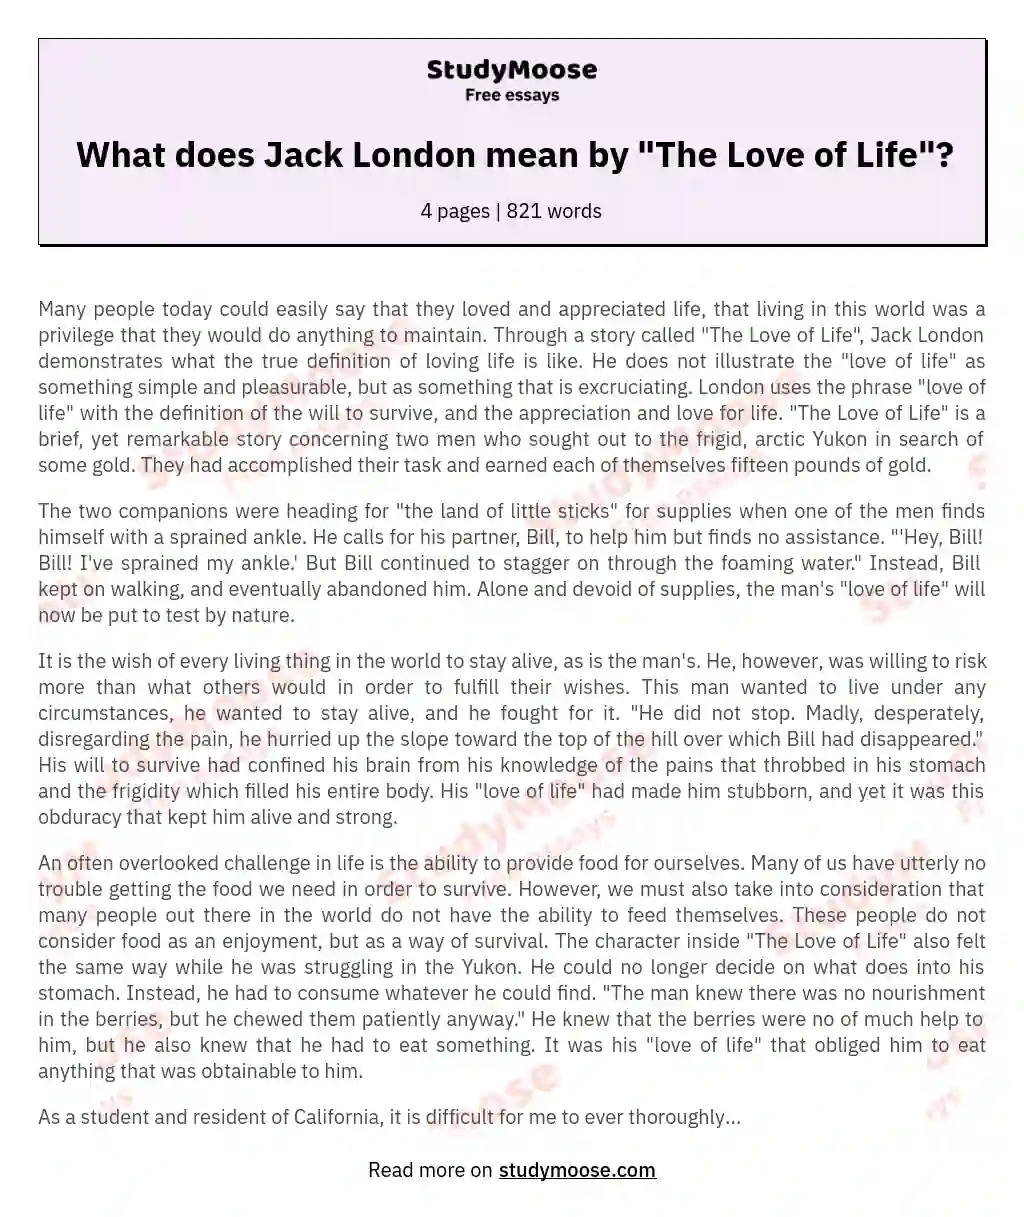 What does Jack London mean by "The Love of Life"? essay